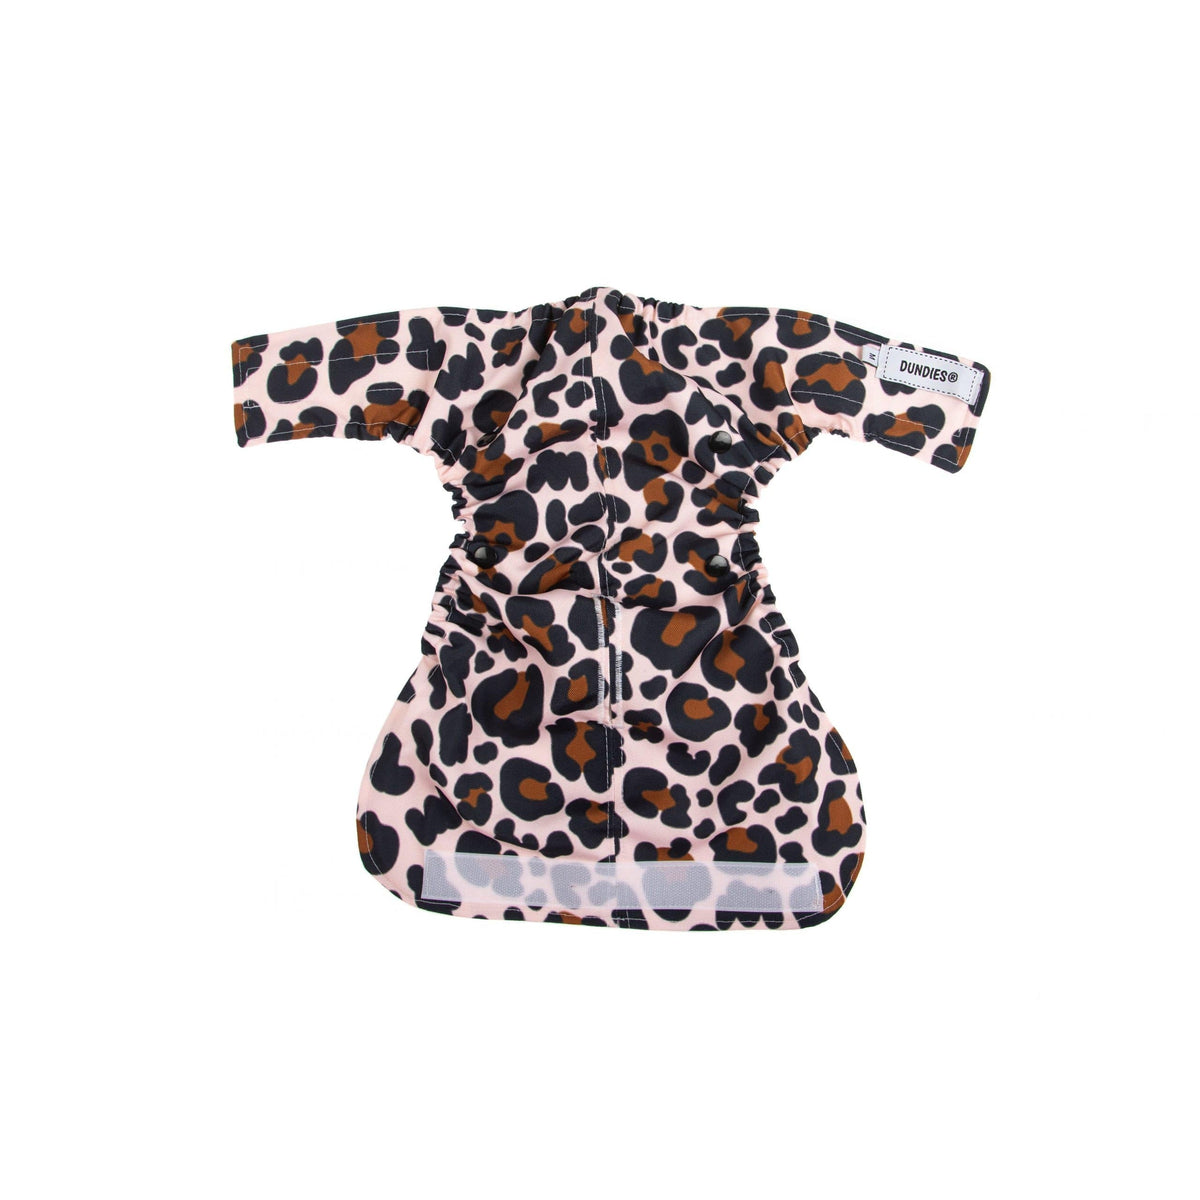 Dundies Leopard Snappie-Dundies Australia - Vet Recommended Pet Nappies